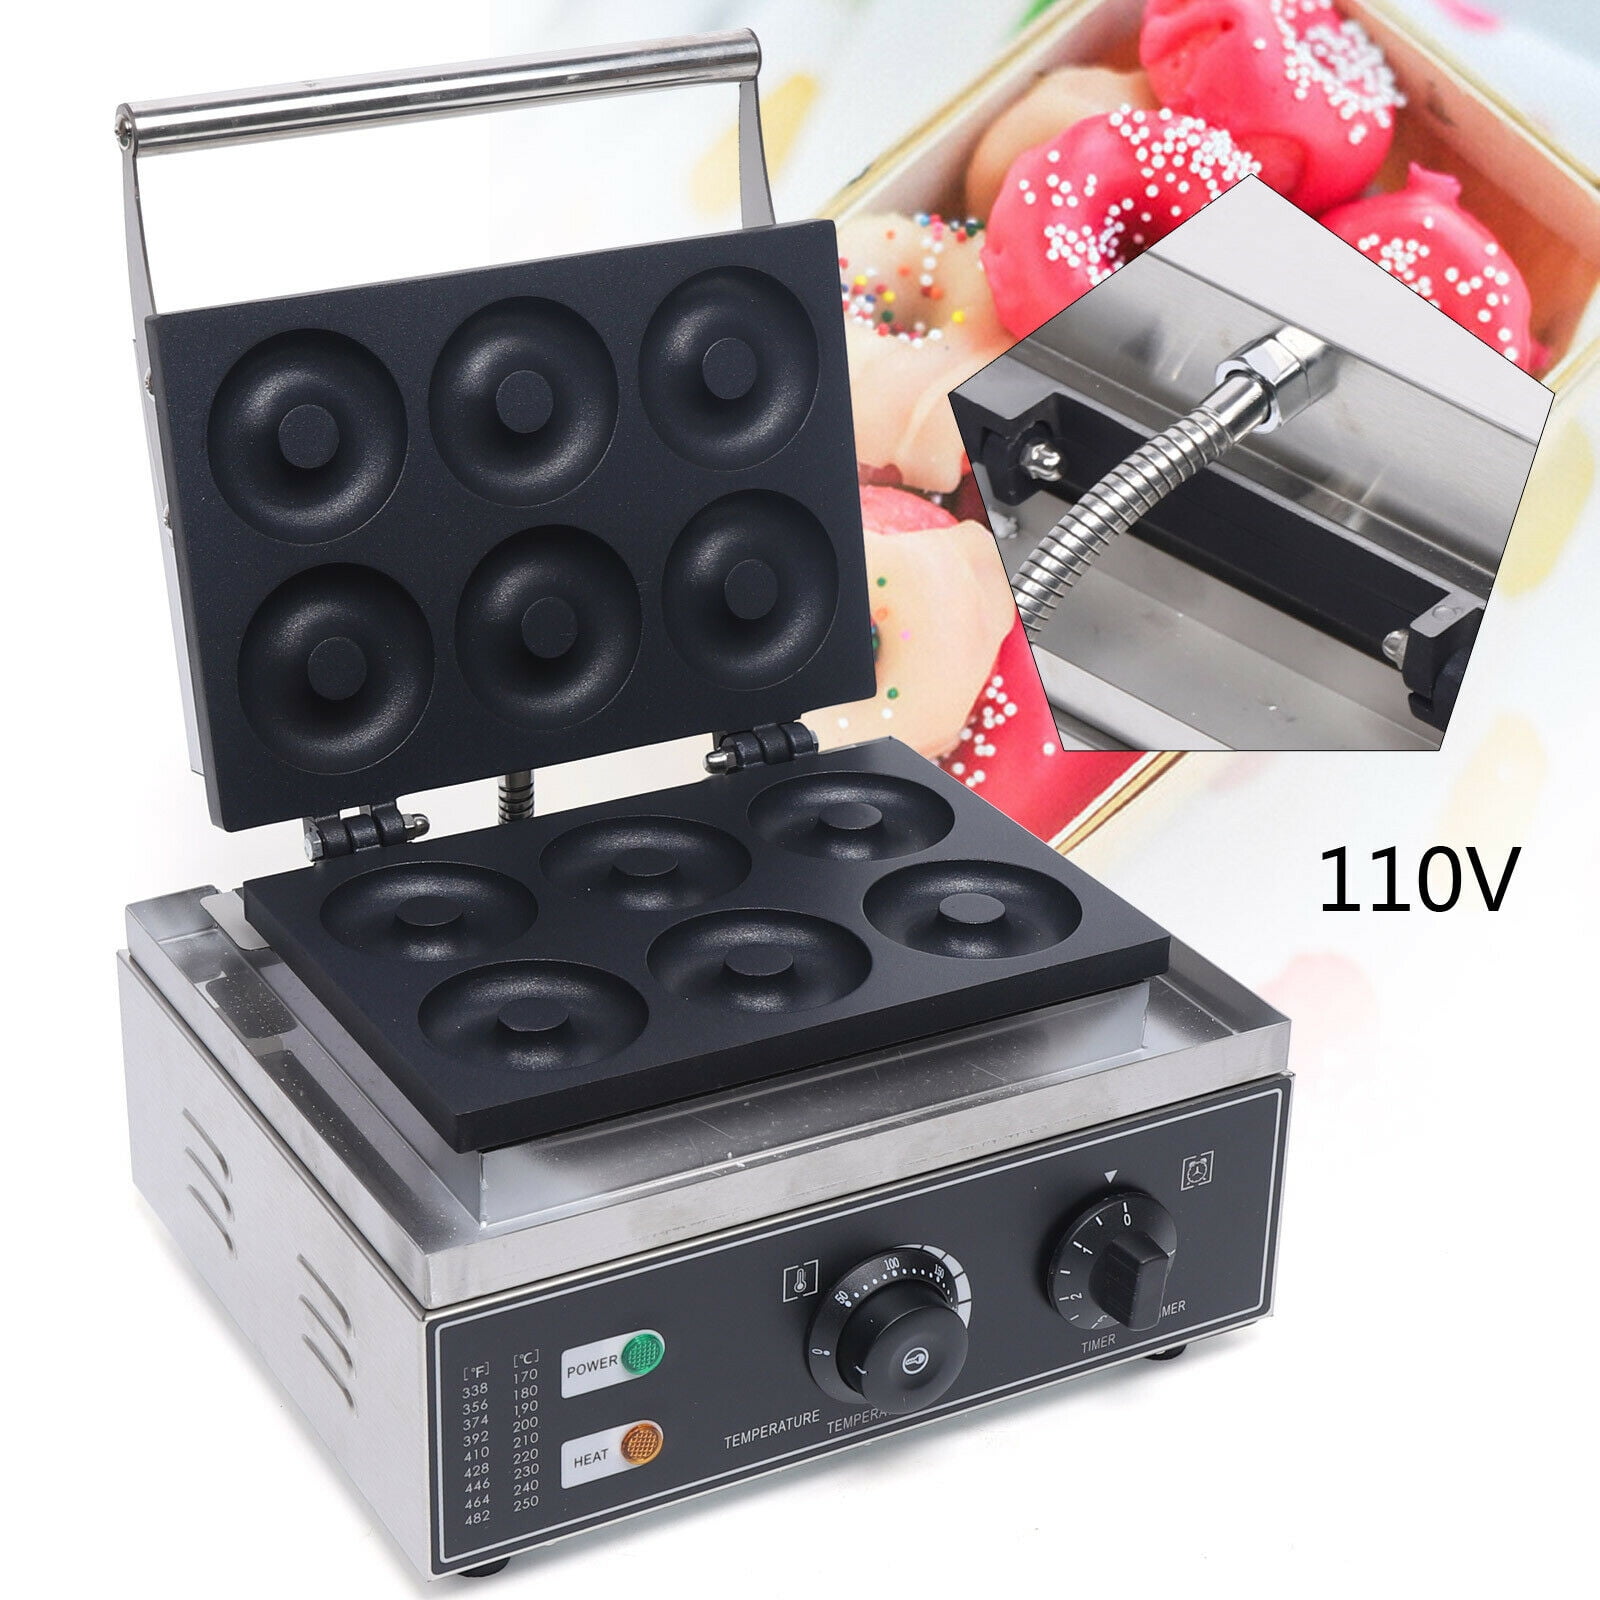 OUKANING 1550W Electric Donut Maker Commercial Stainless Steel Breakfast Maker  Double Sided Heating